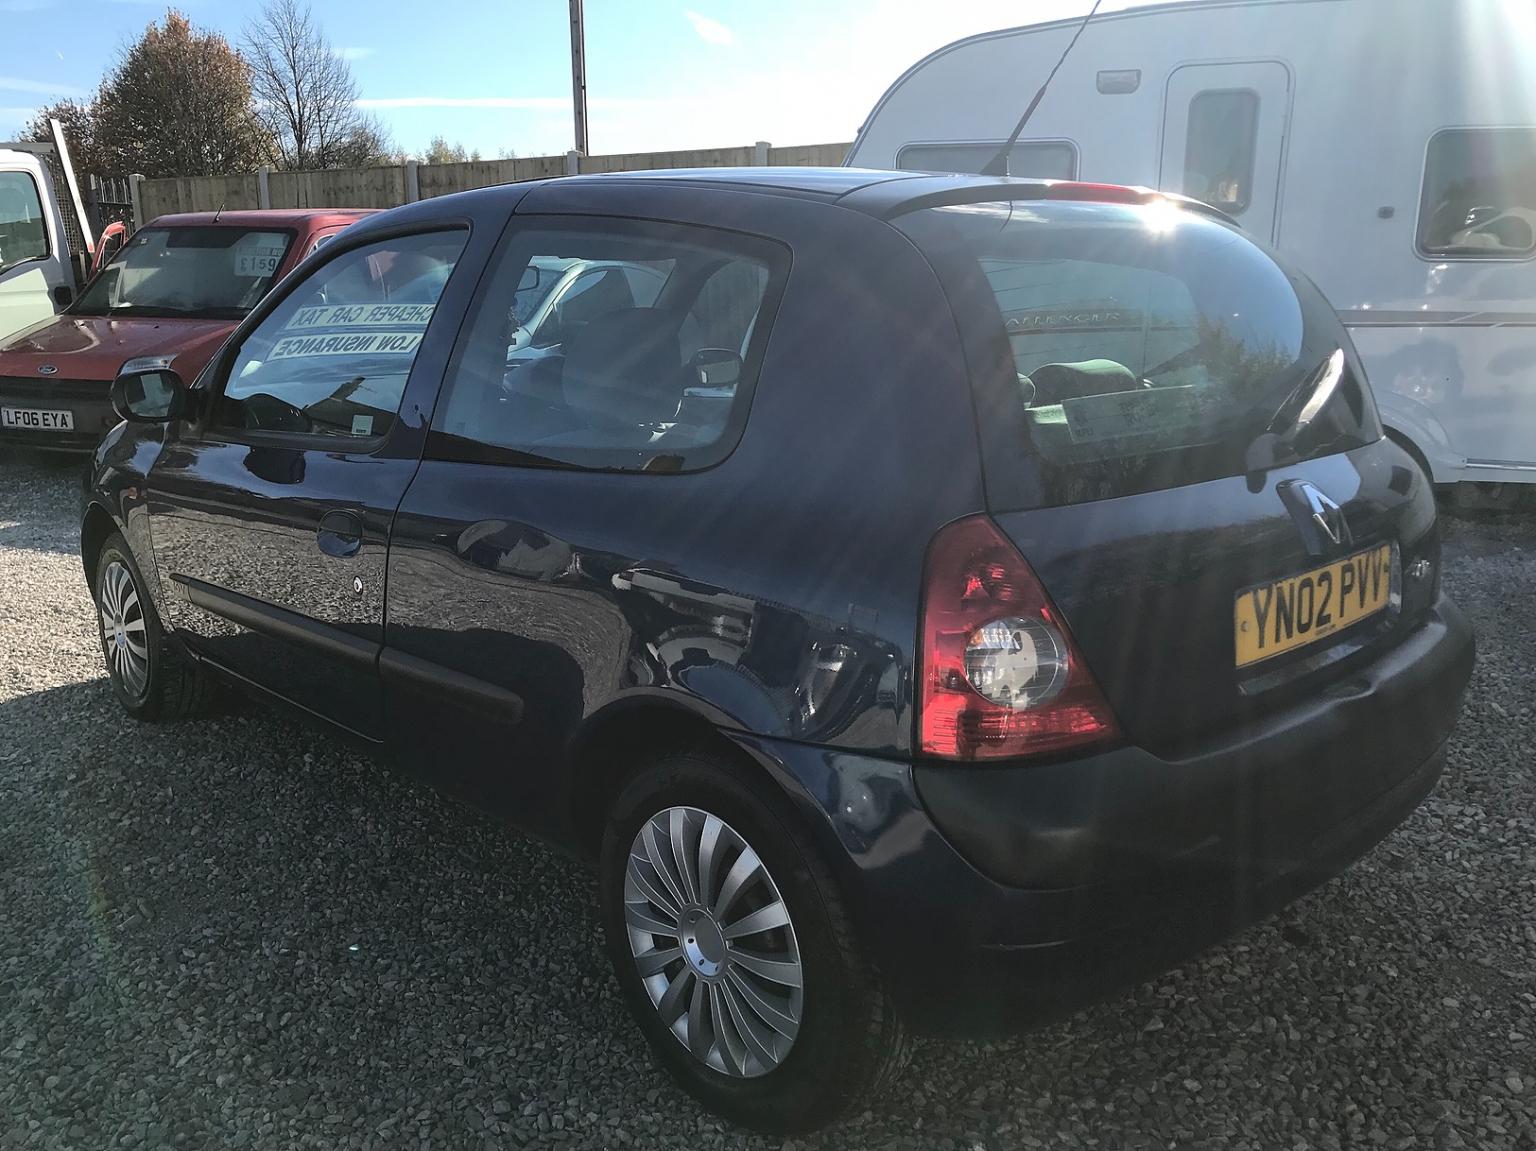 2002 Renault Clio 1.2 in S419BH Chesterfield for £695.00 